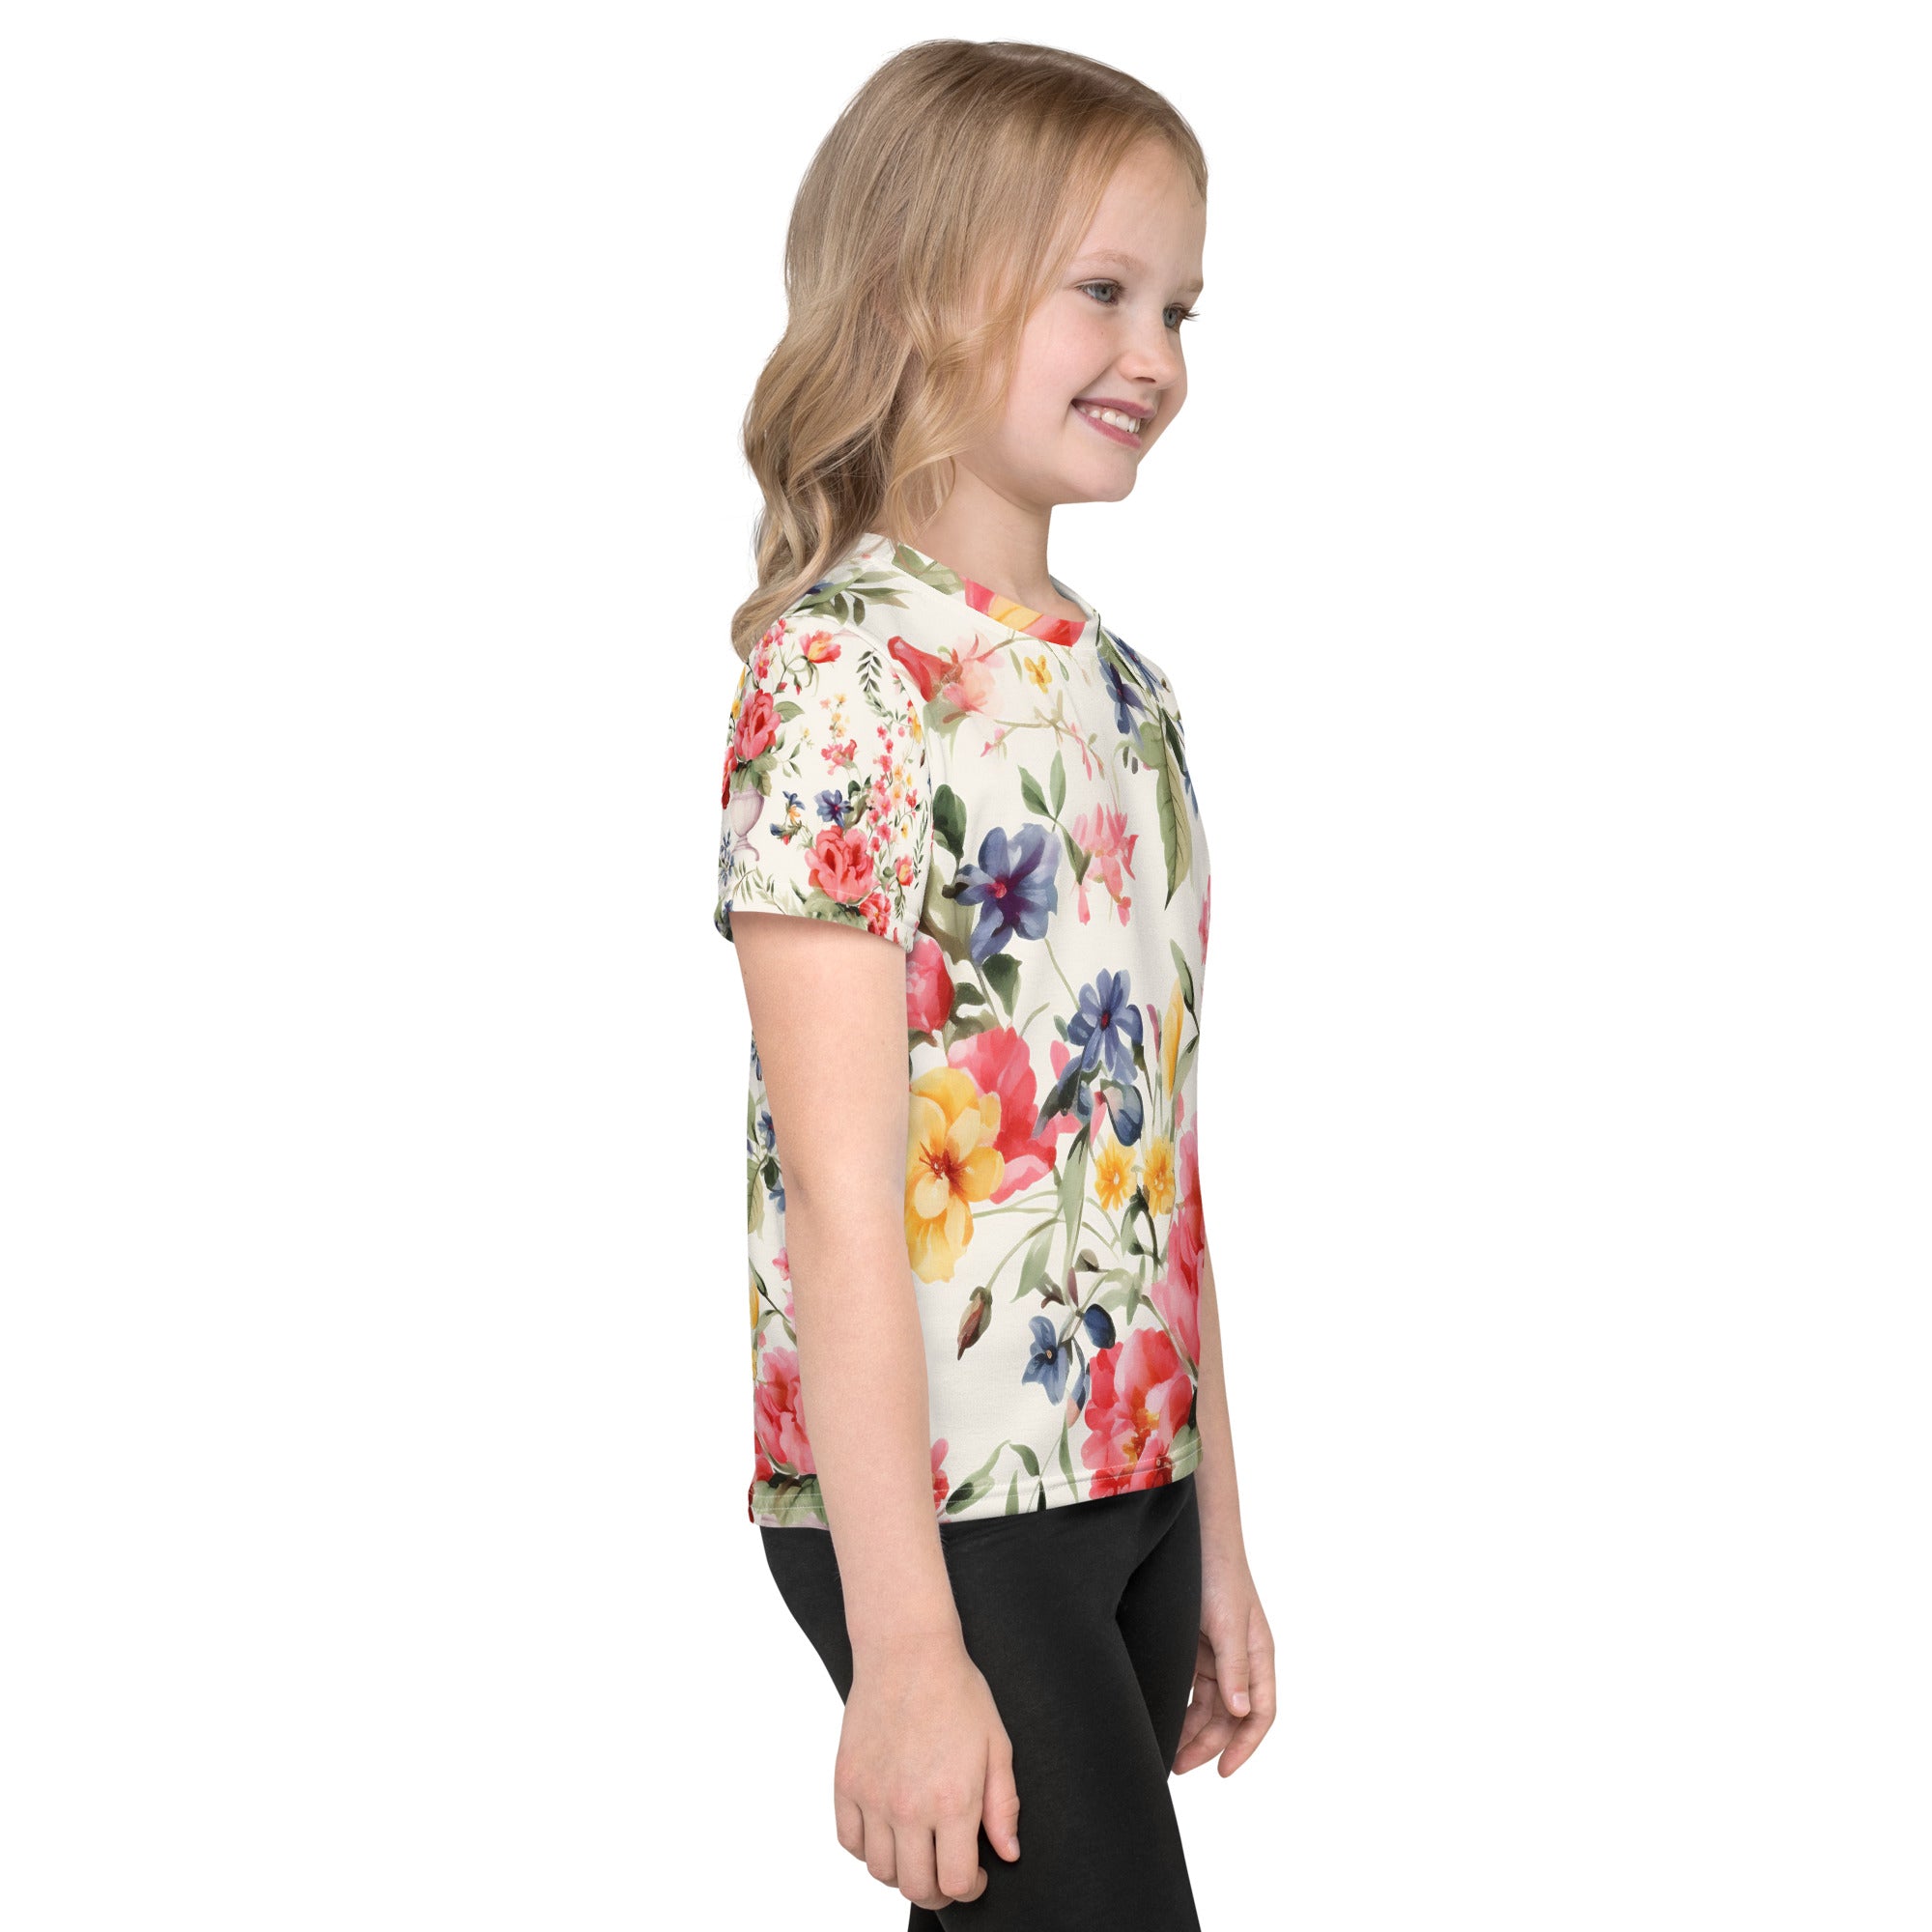 Timeless Elegance Blooms: Kids' Shirt with Historic Italian Porcelain Floral Pattern - A Nod to Rome's Artistic Heritage!